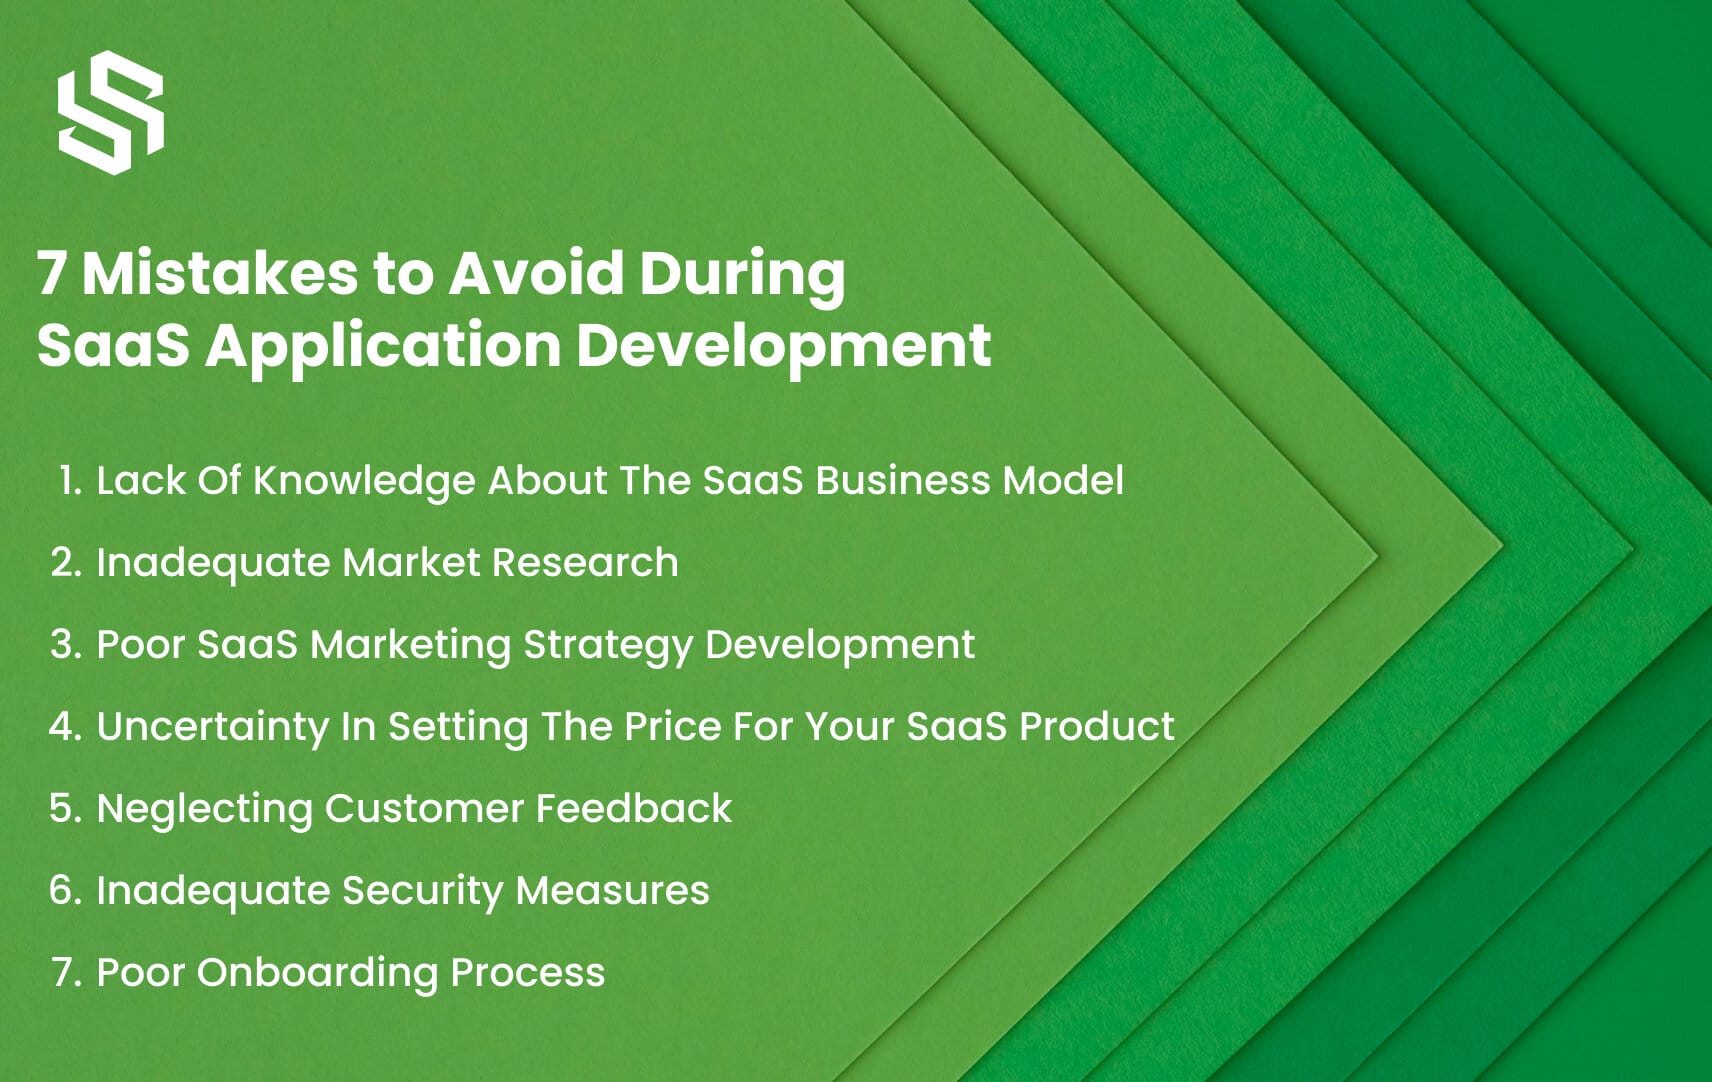 7 Mistakes to Avoid During SaaS Application Development